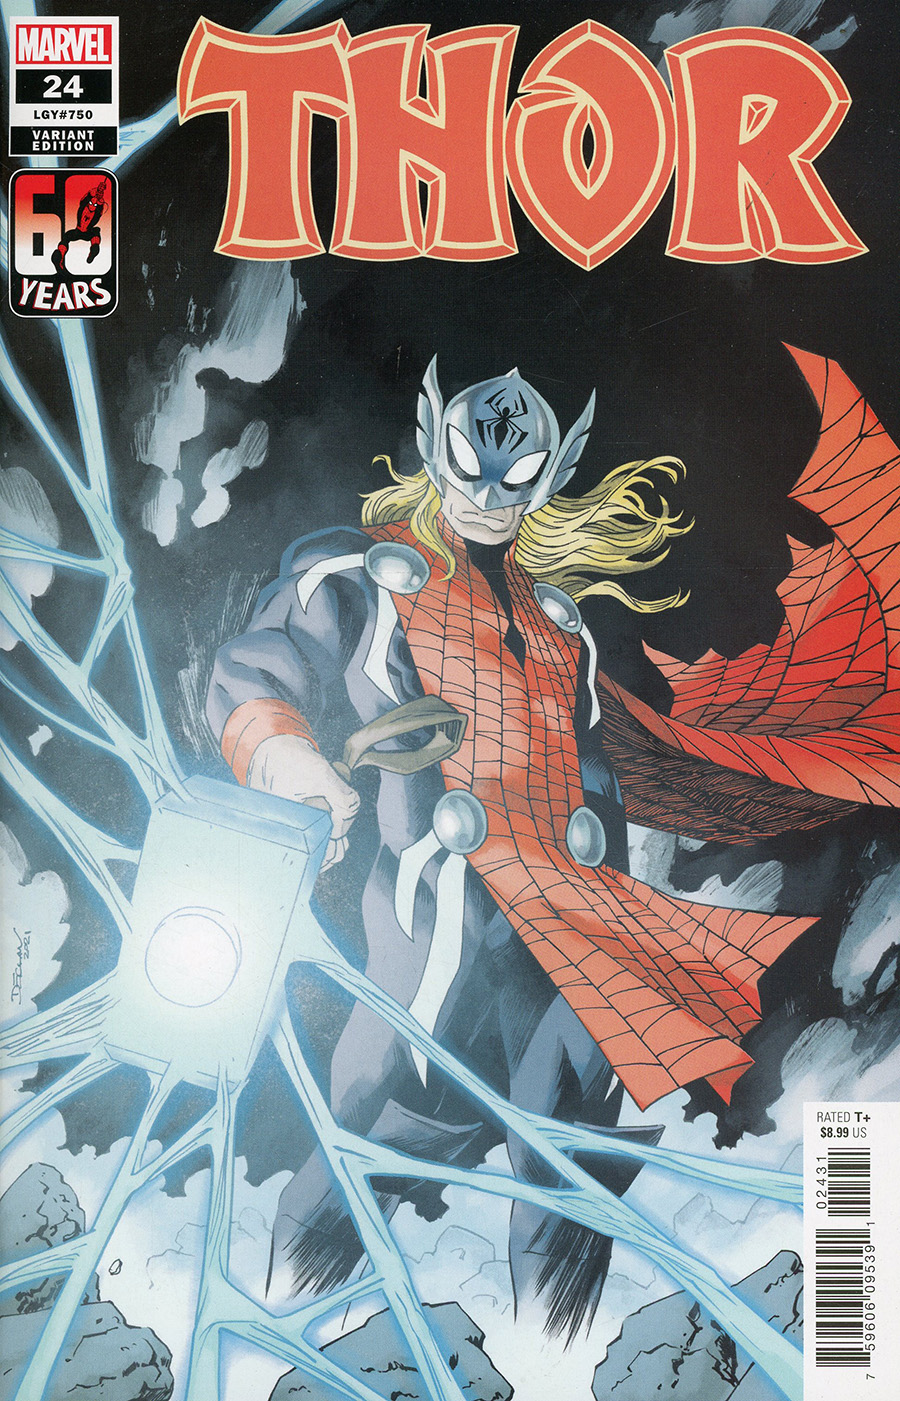 Thor Vol 6 #24 Cover B Variant Declan Shalvey Spider-Man Cover (#750)